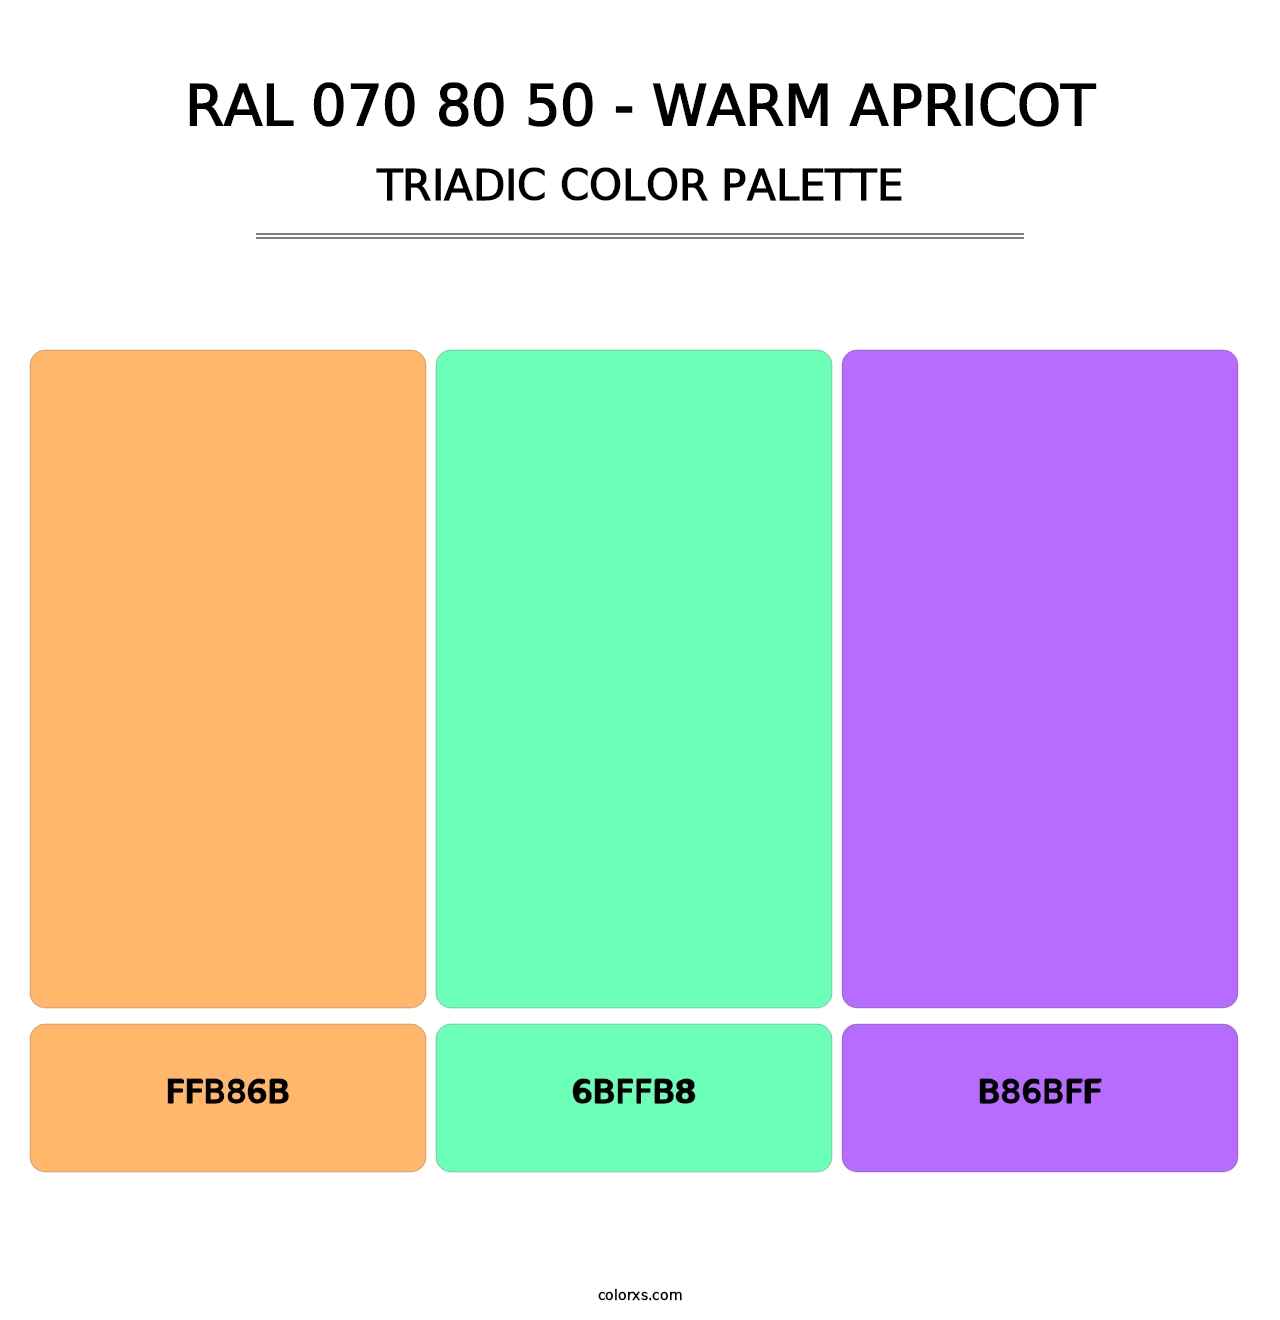 RAL 070 80 50 - Warm Apricot - Triadic Color Palette